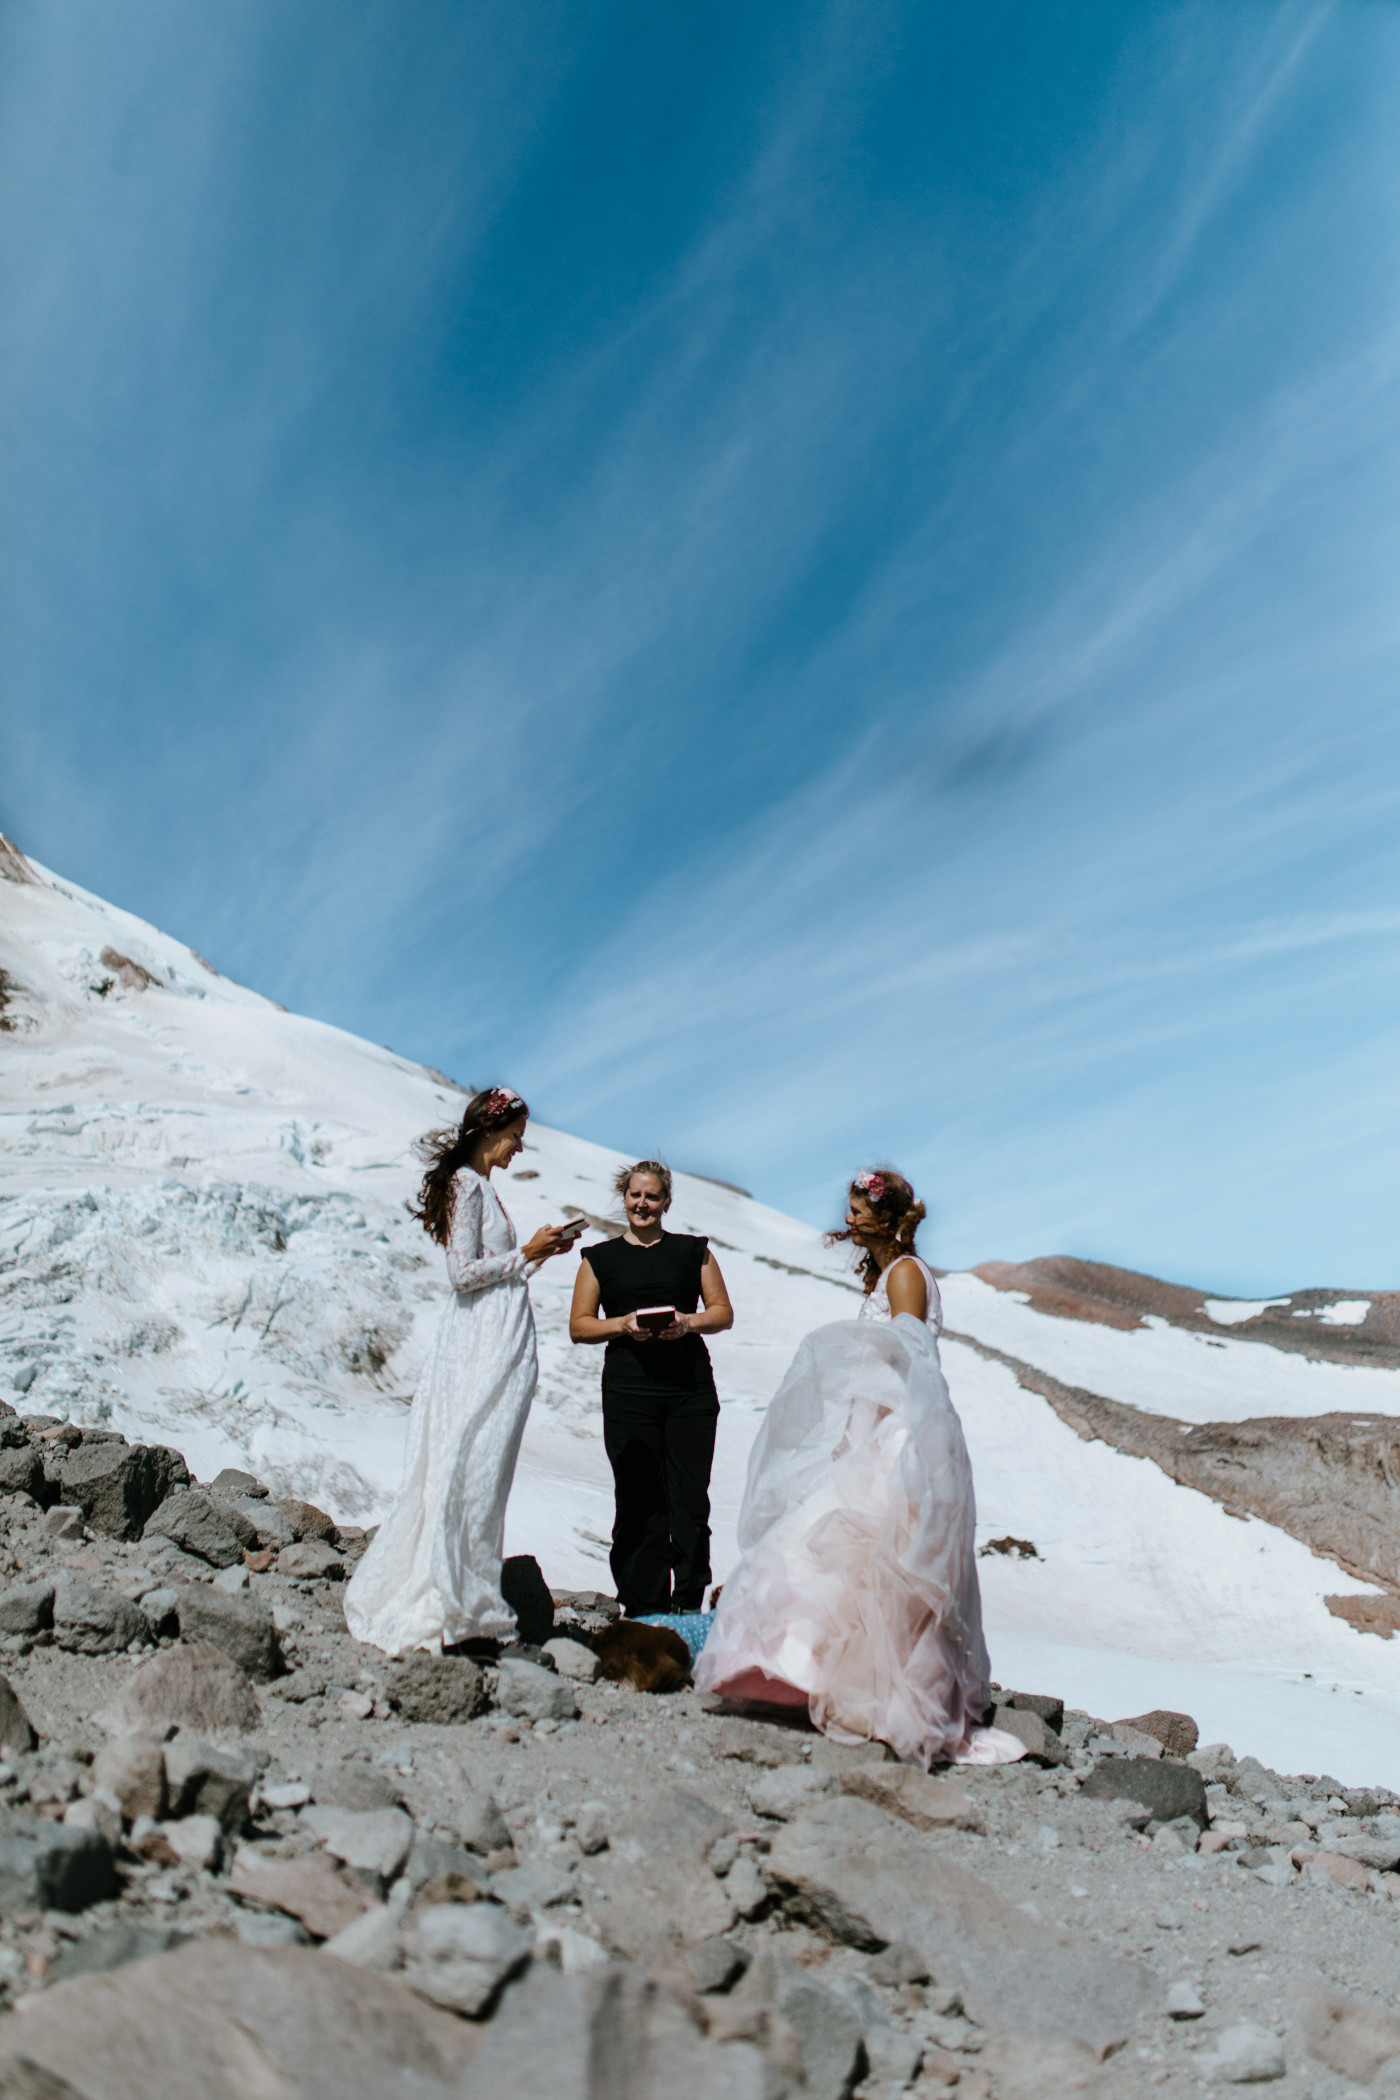 Heather and Margaux during their elopement ceremony with a view of the glaciers in the background. Elopement photography at Mount Hood by Sienna Plus Josh.